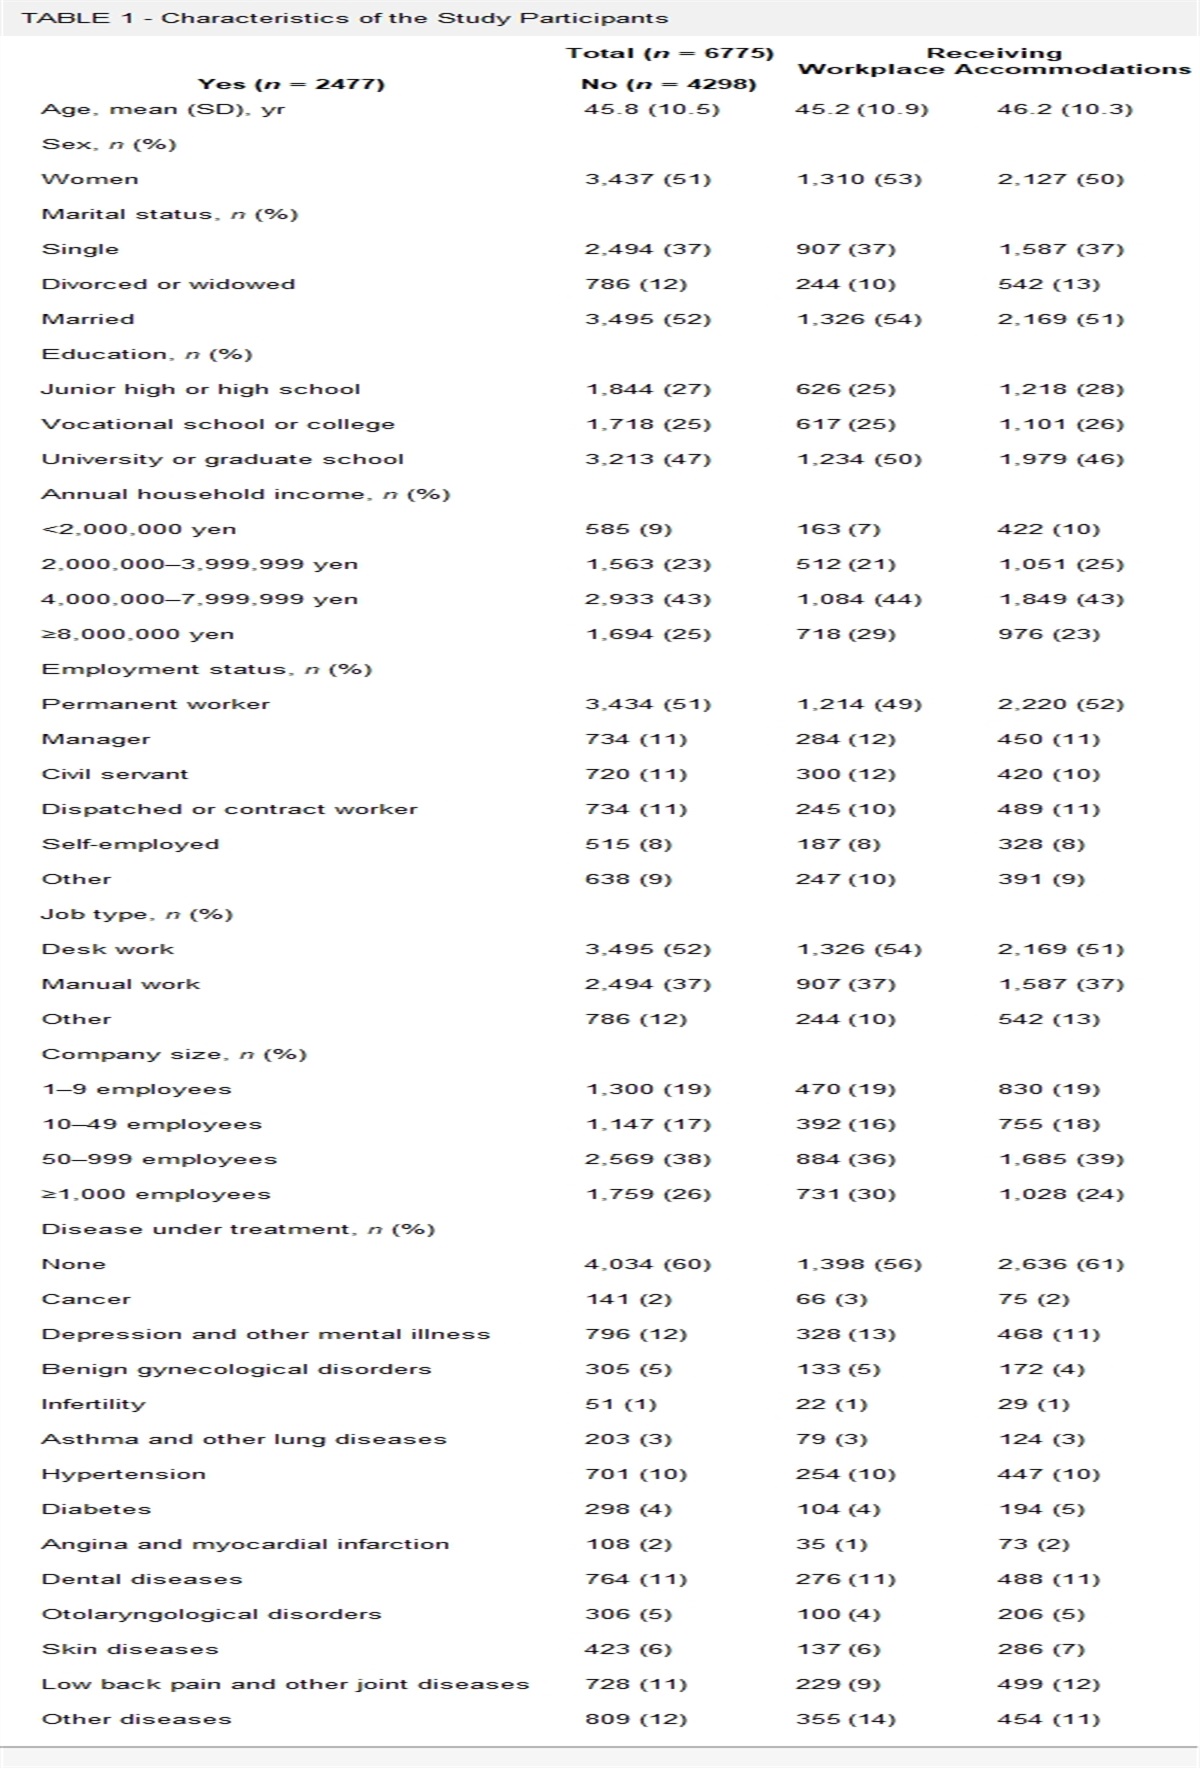 Association Between Types of Chronic Disease and Receiving Workplace Accommodations: A Cross-Sectional Study of Japanese Workers